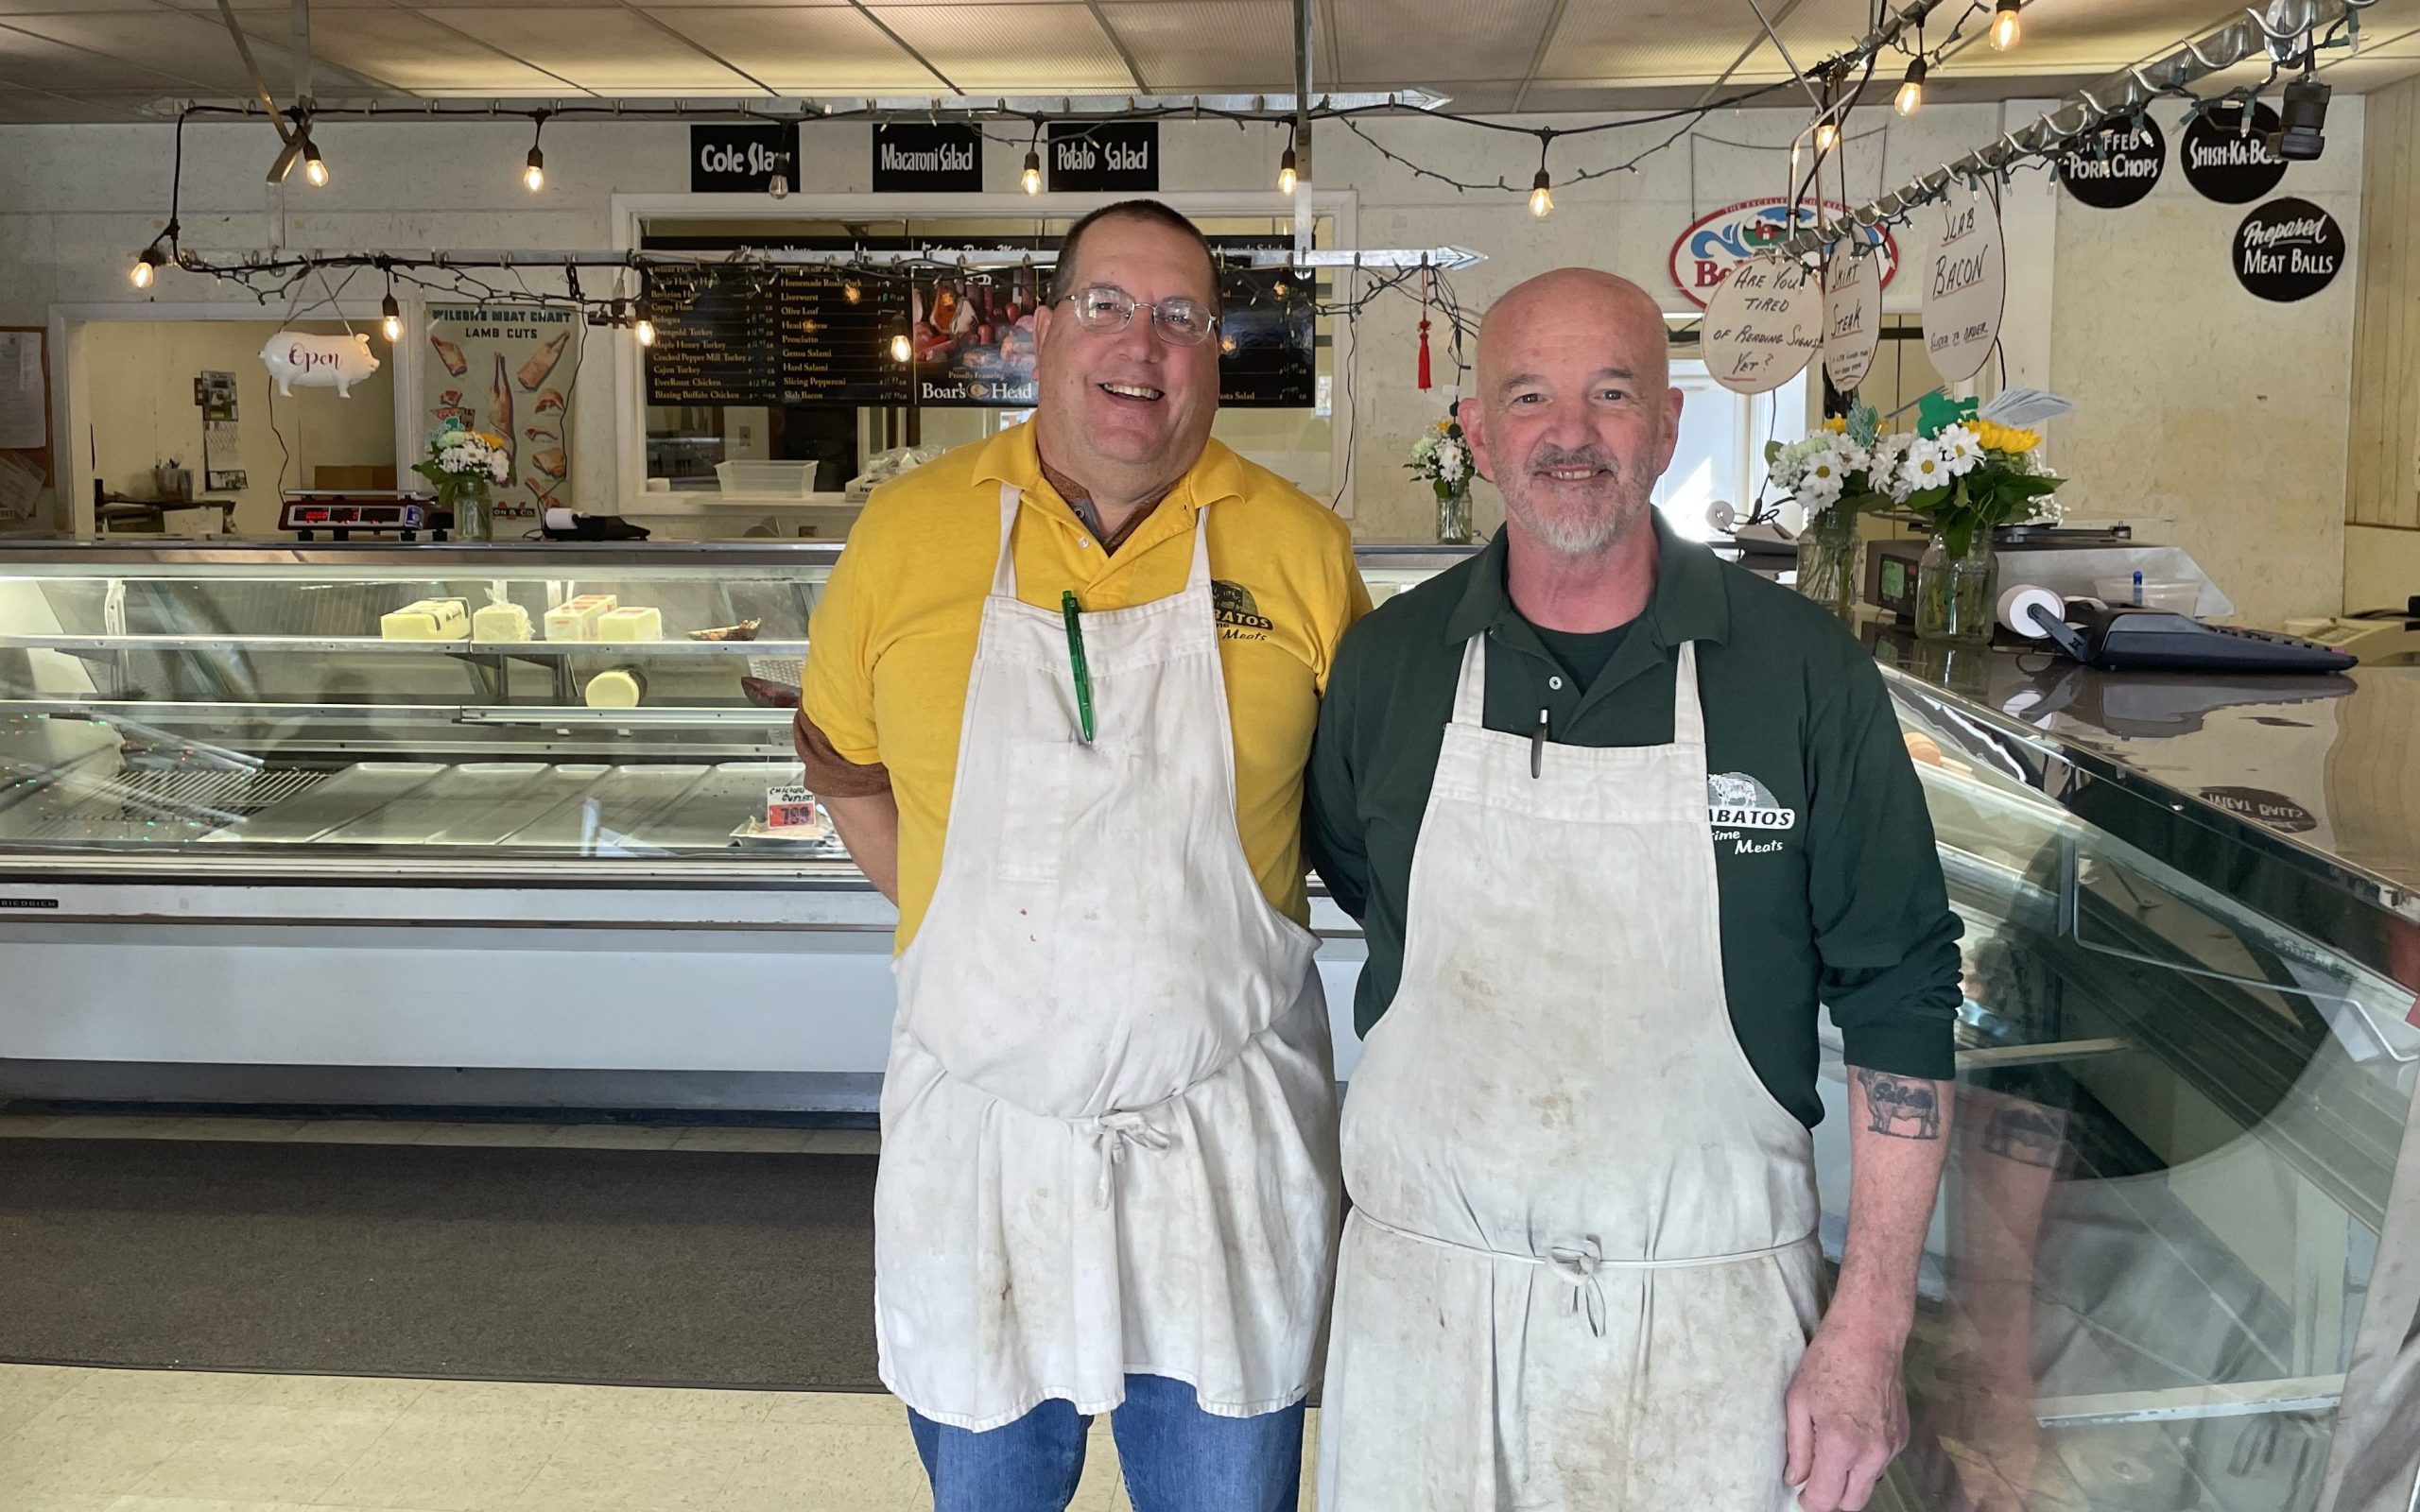 In keeping with family tradition, cousins John, left, and Andy Sabatos oversaw Sabatos Prime Meats in Belford for 45 years. Stephen Appezzato